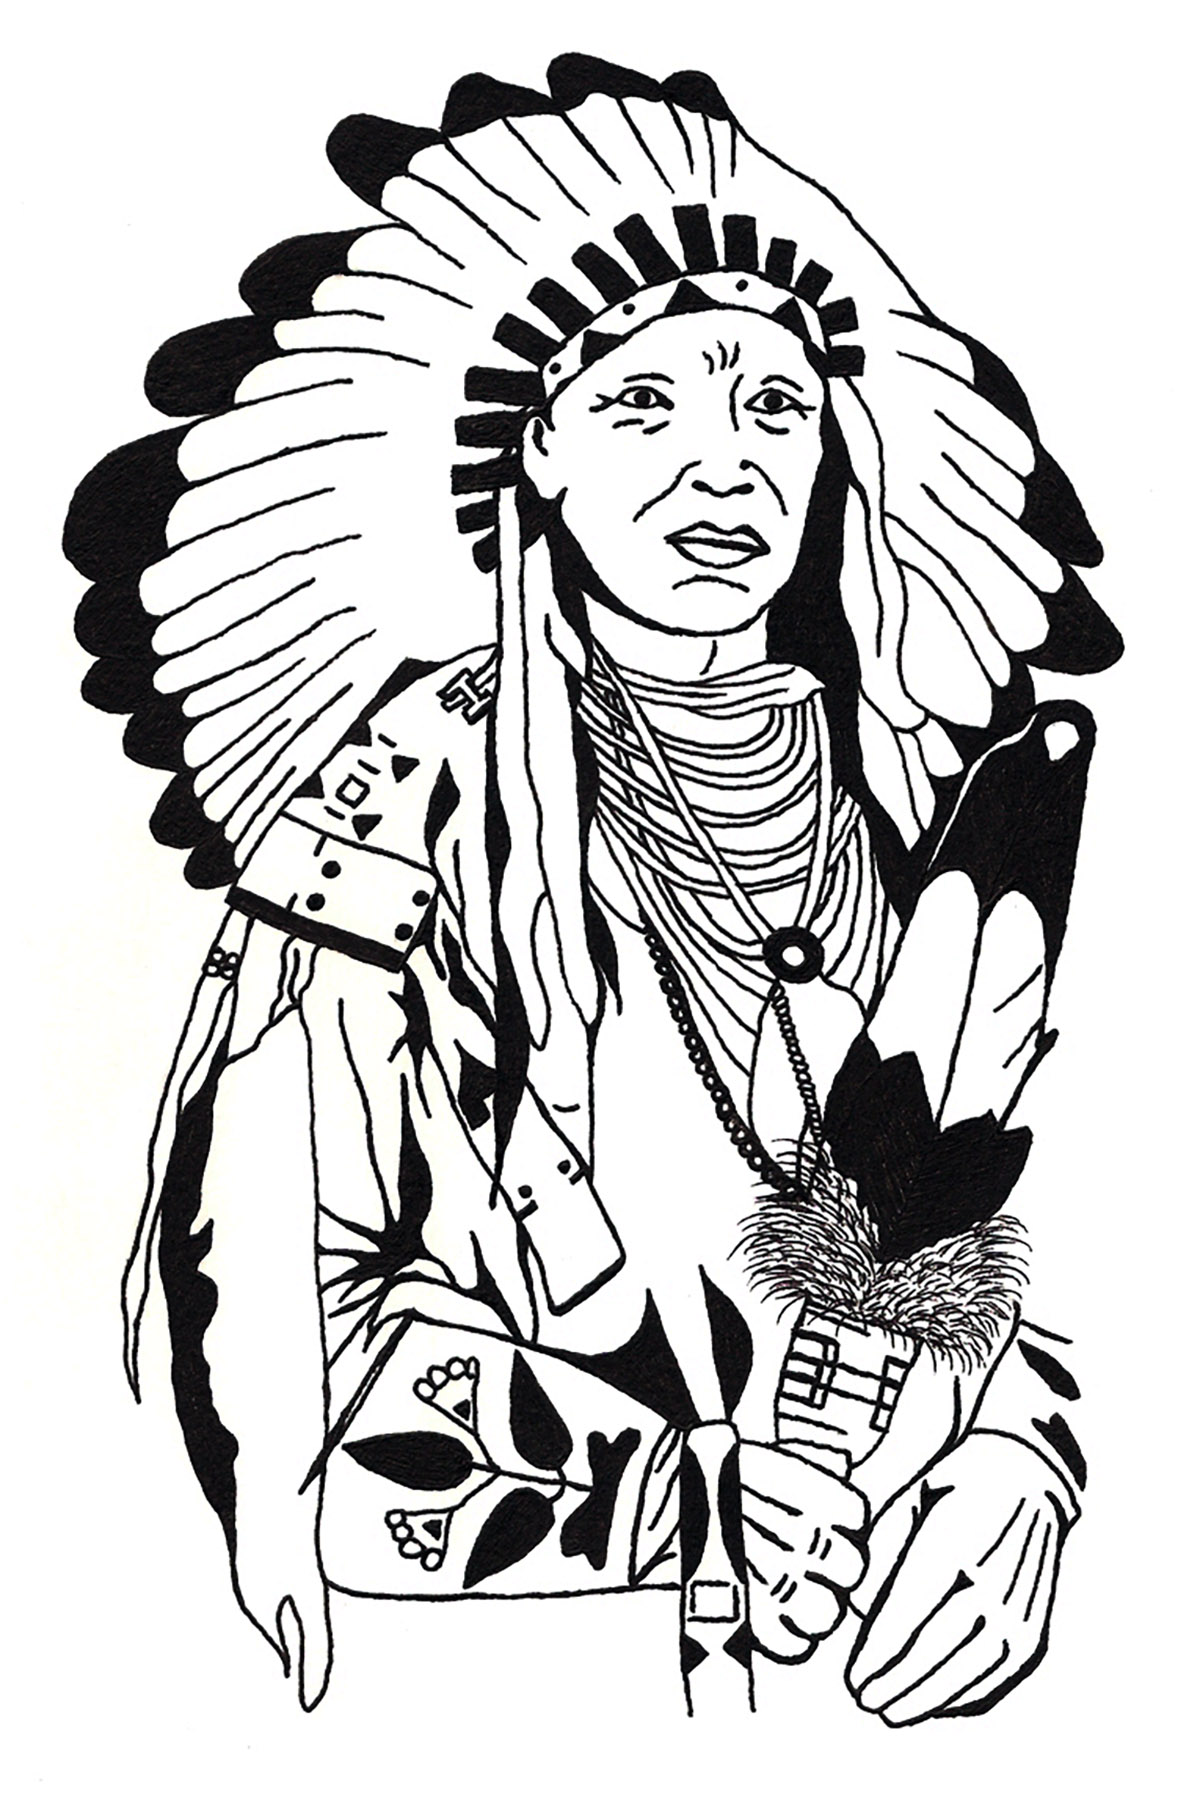 American Indian Chief - Native American Adult Coloring Pages